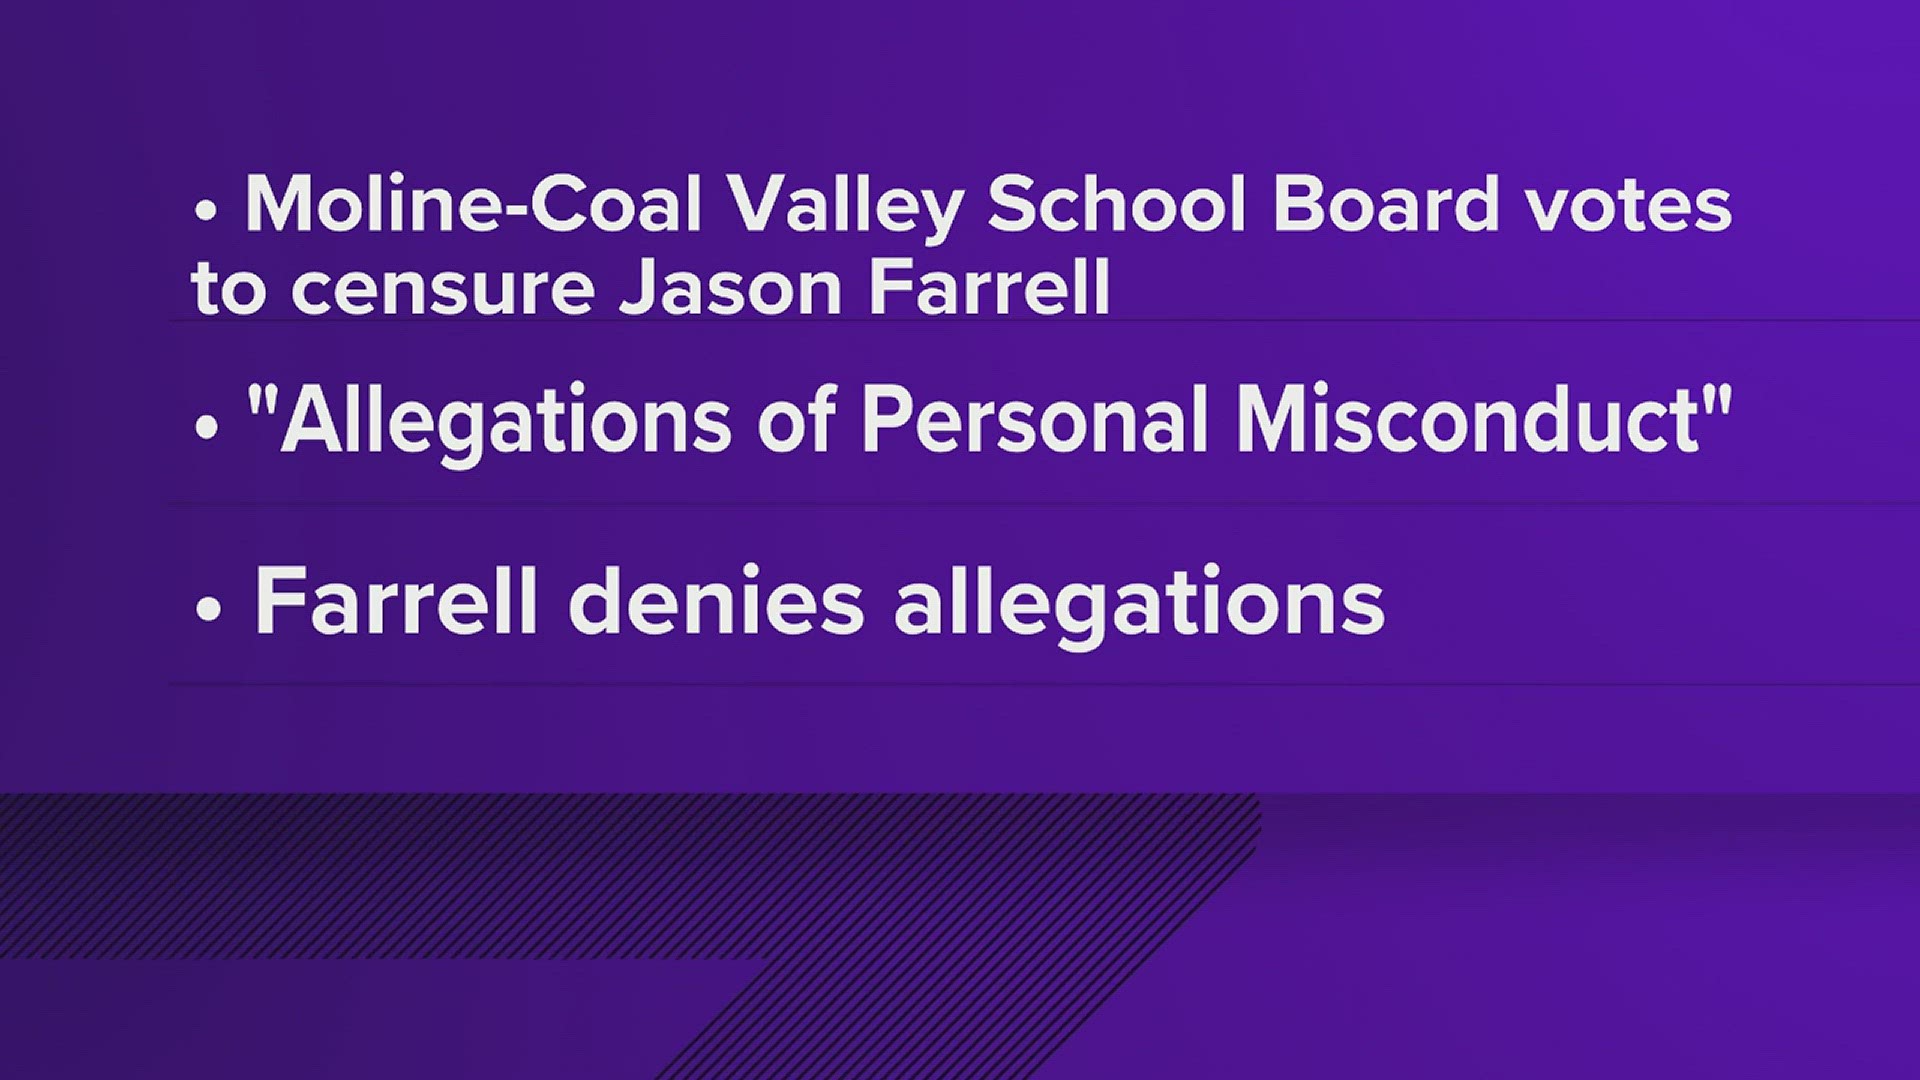 The school board voted 6-0 Monday night to censure board member Jason Farrell after allegations of misconduct were posted online.